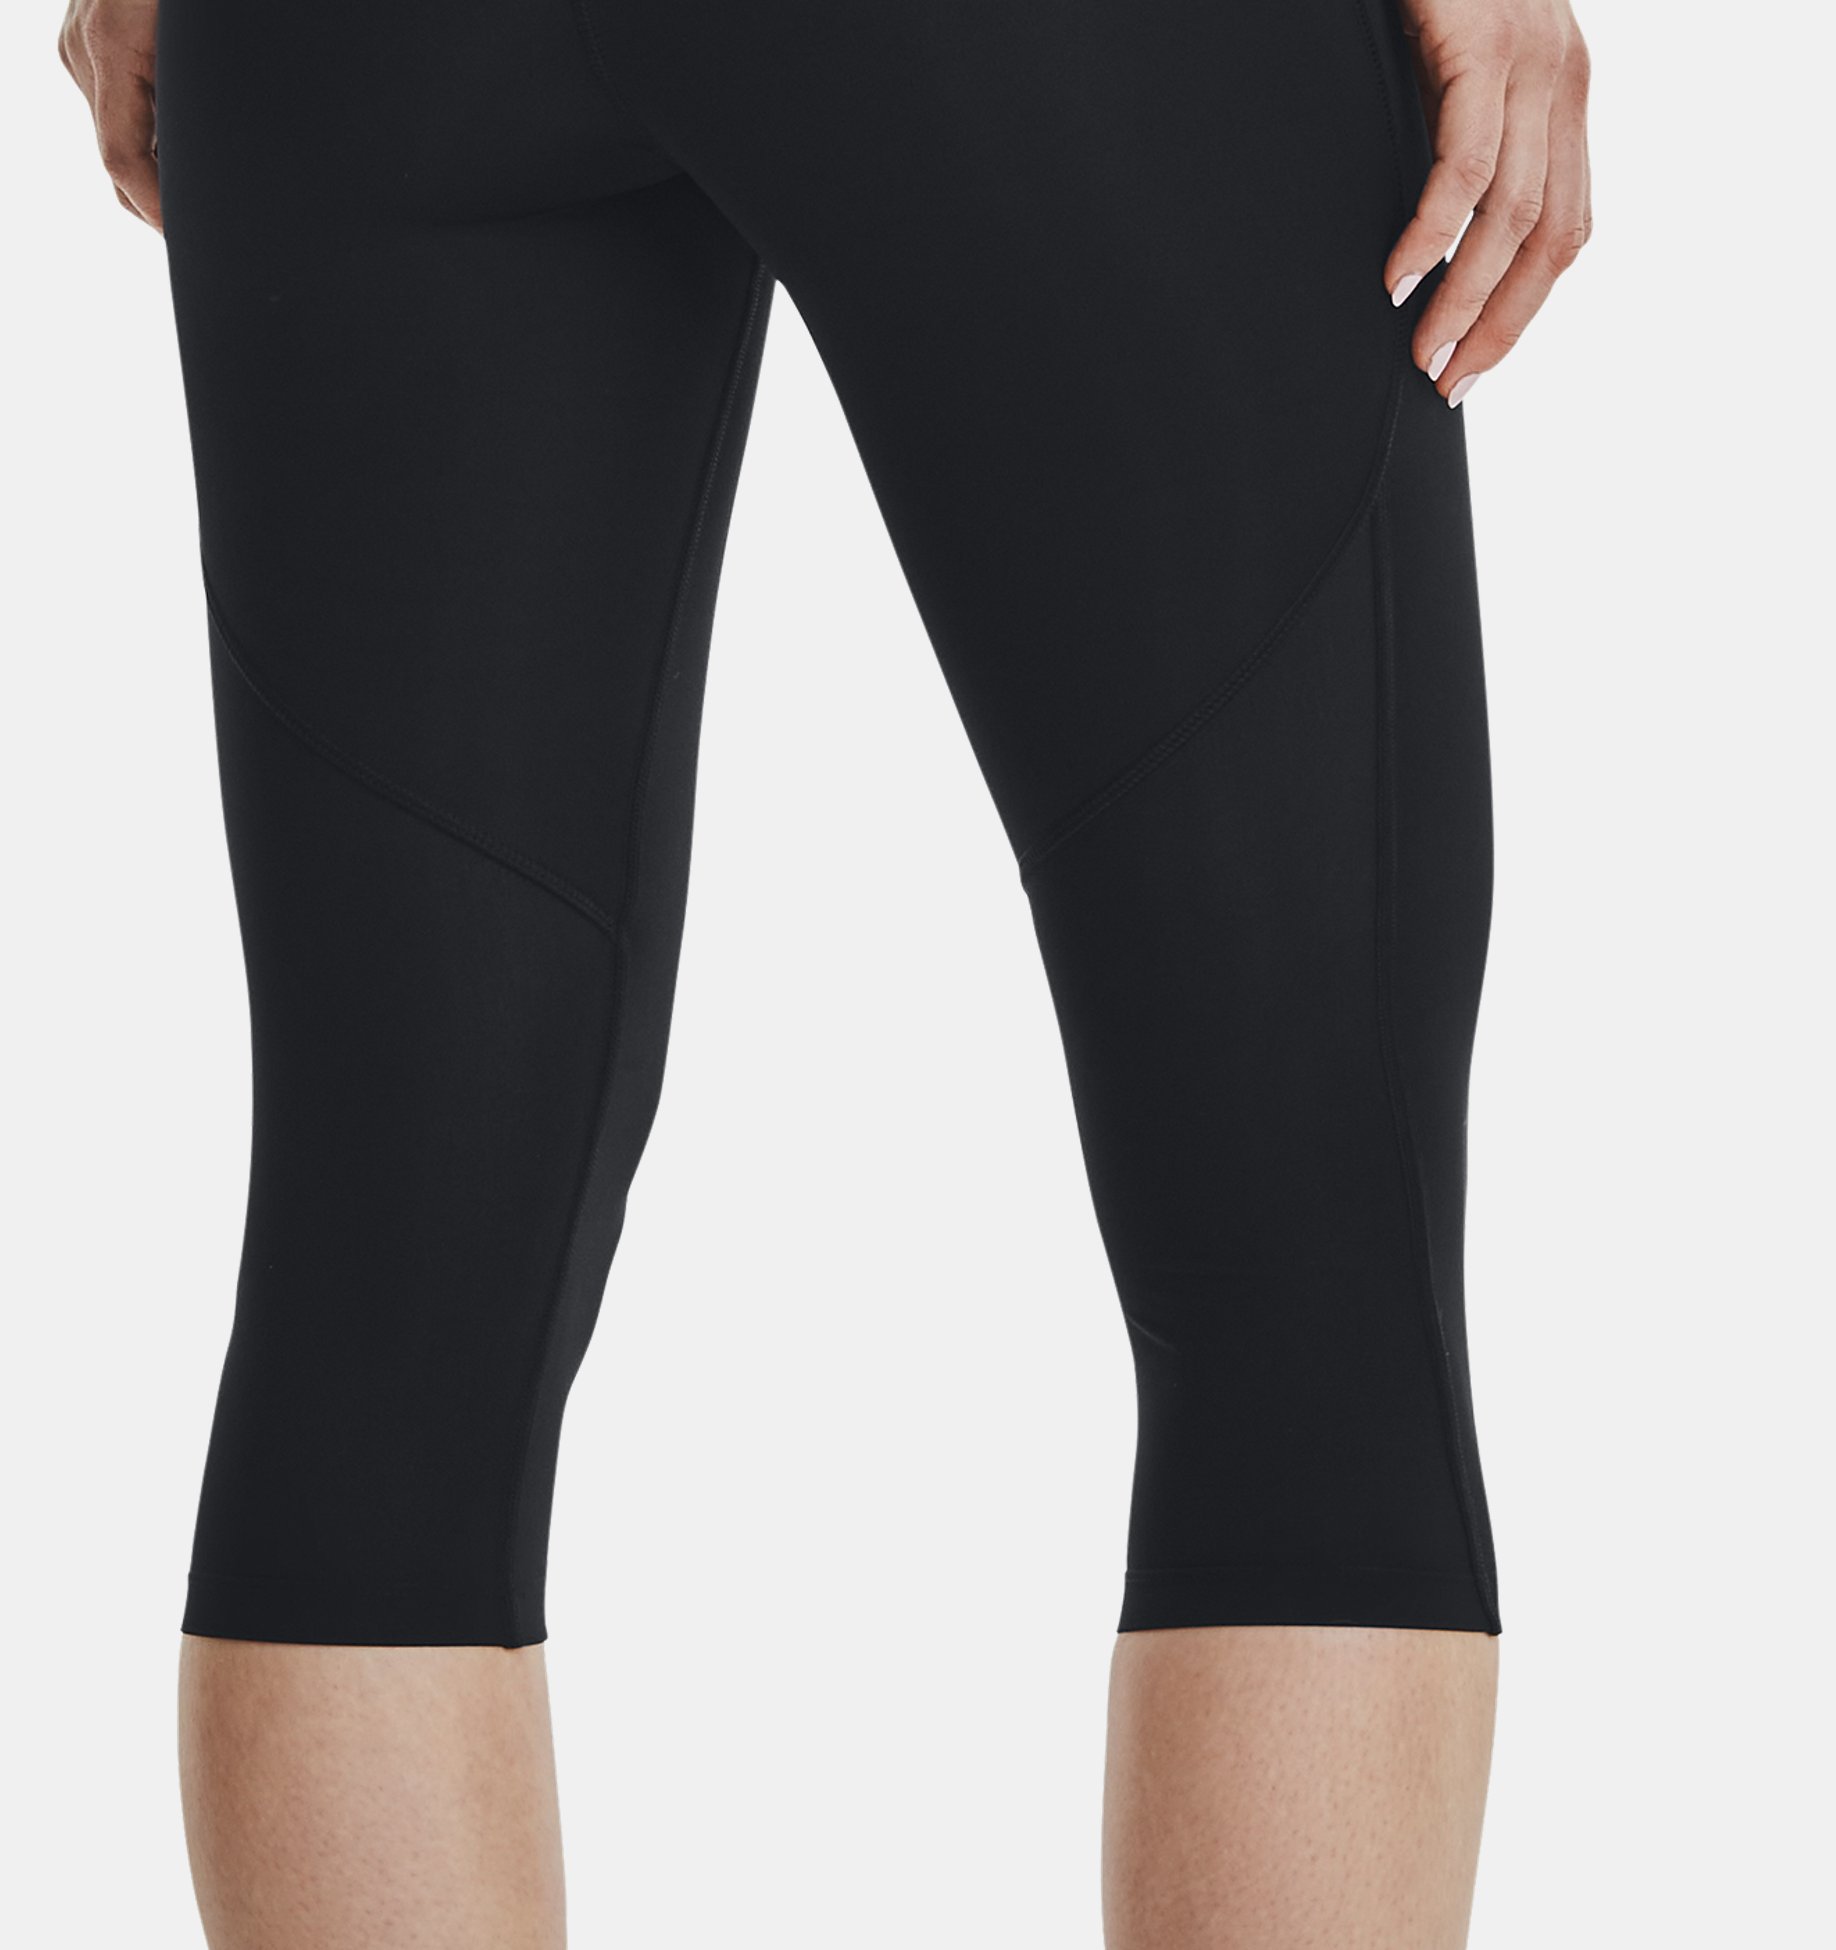 Women's Fly | Under Armour